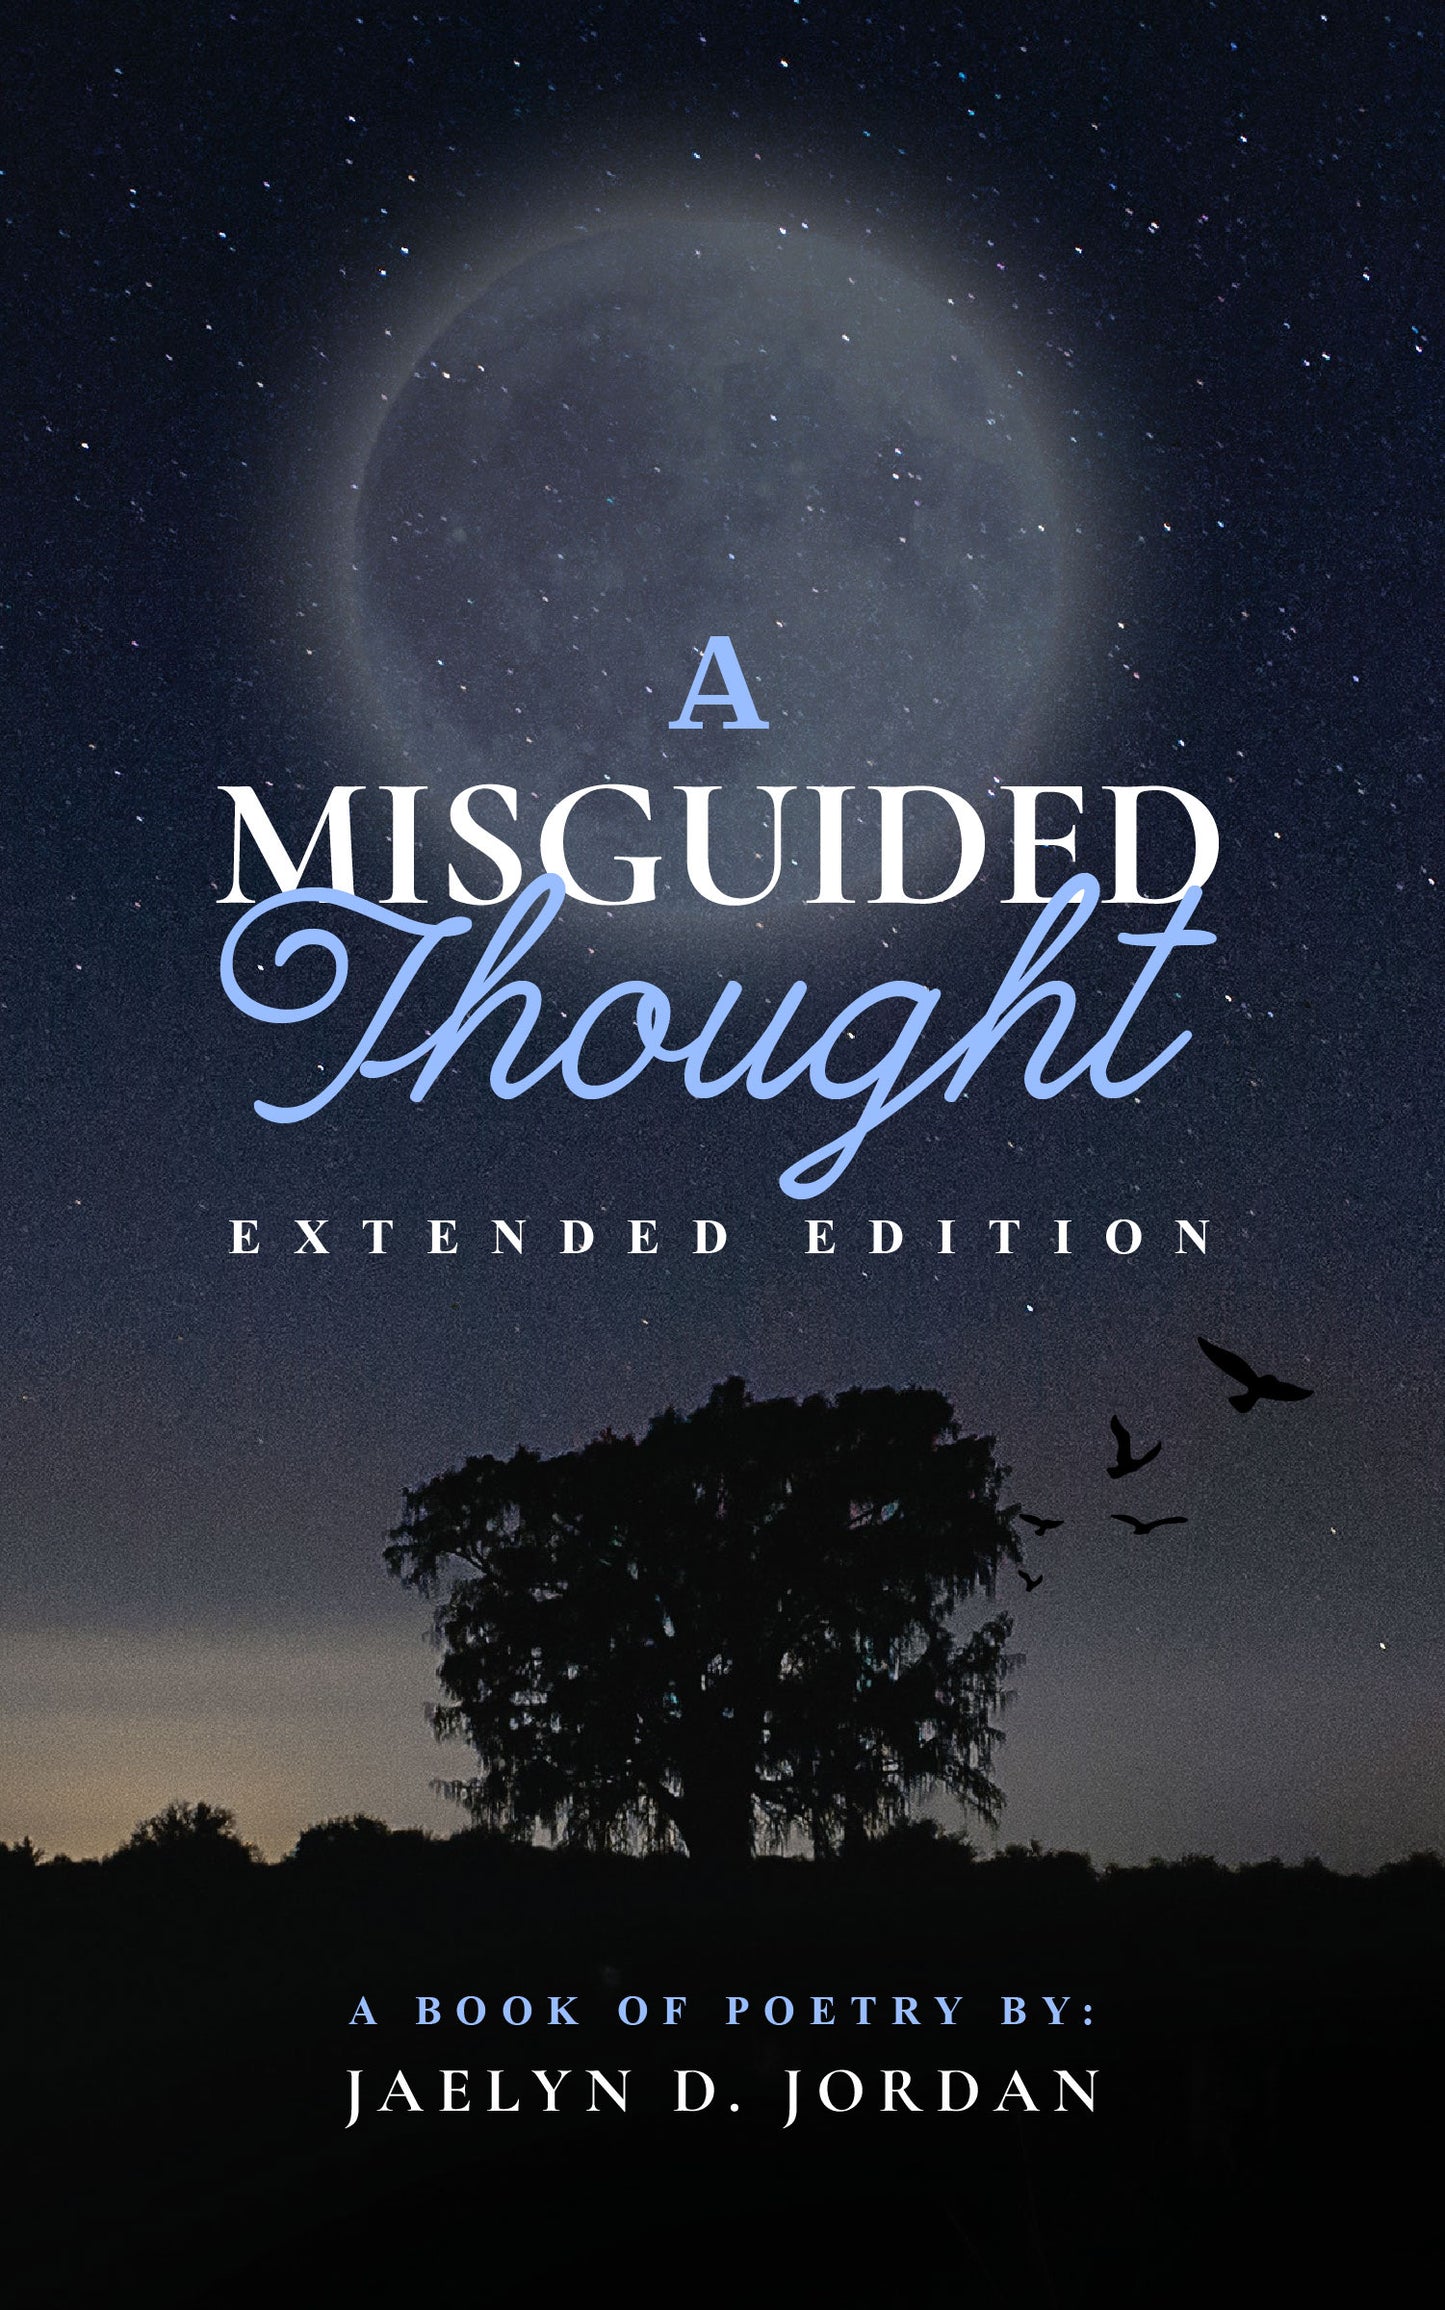 A Misguided Thought extended edition